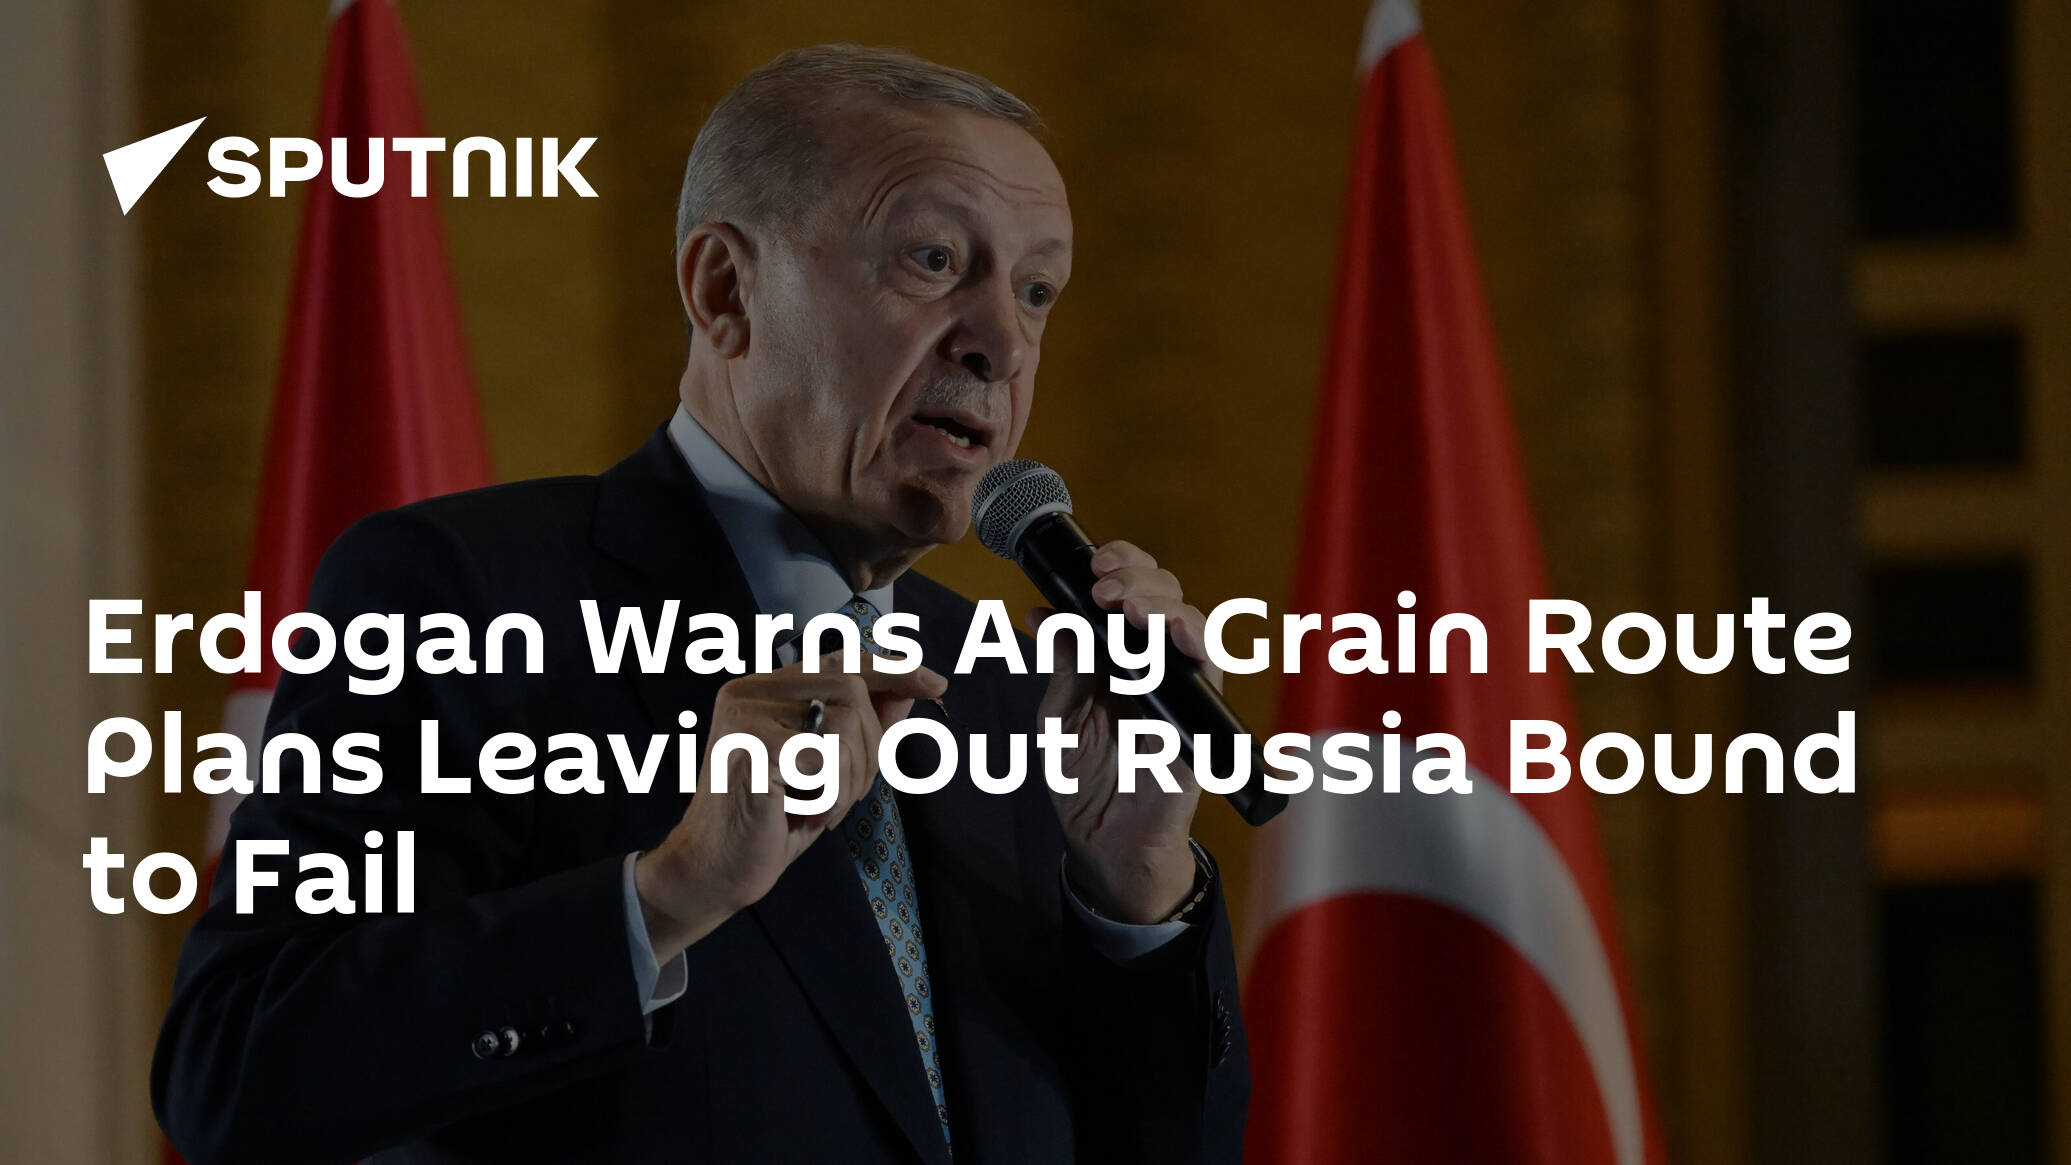 Erdogan Warns Any Grain Route Plans Leaving Out Russia Bound to Fail